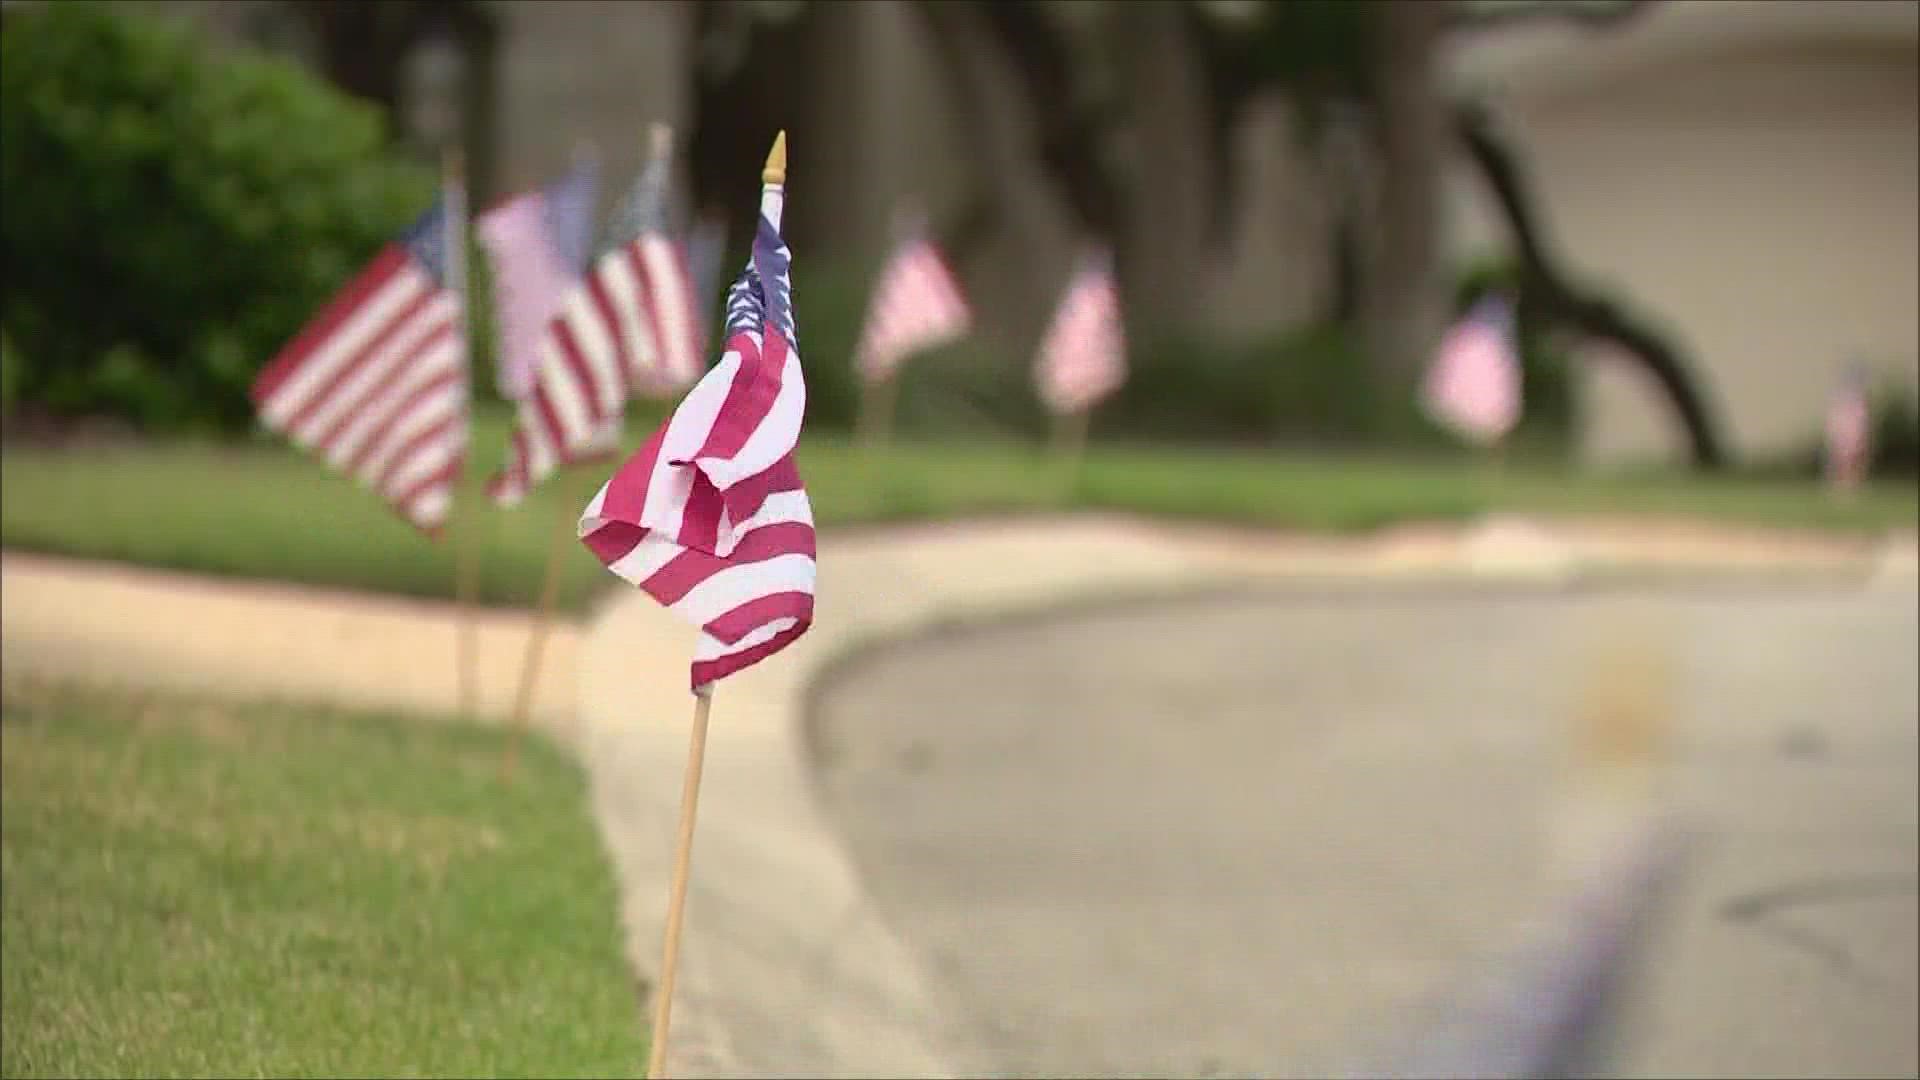 In an annual tradition, the community of Roseheart is honoring veterans on Memorial Day.